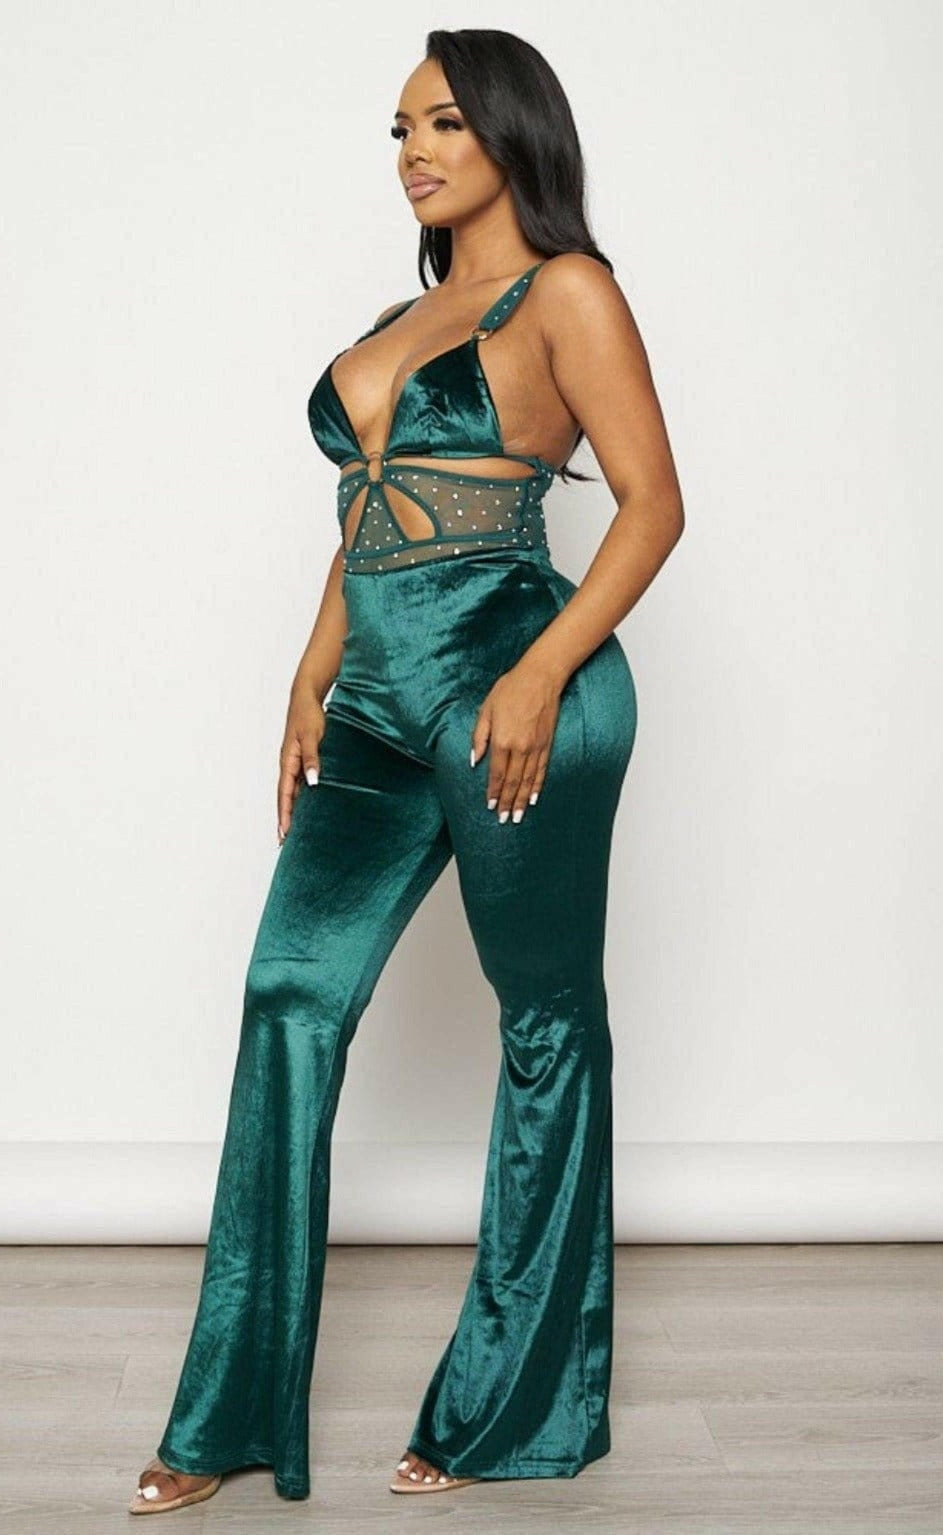 Epicplacess jumpsuits SMALL / GREEN / UNITED STATES Band Waist Poplin Velvet Jumpsuits BCCJS70775 -1